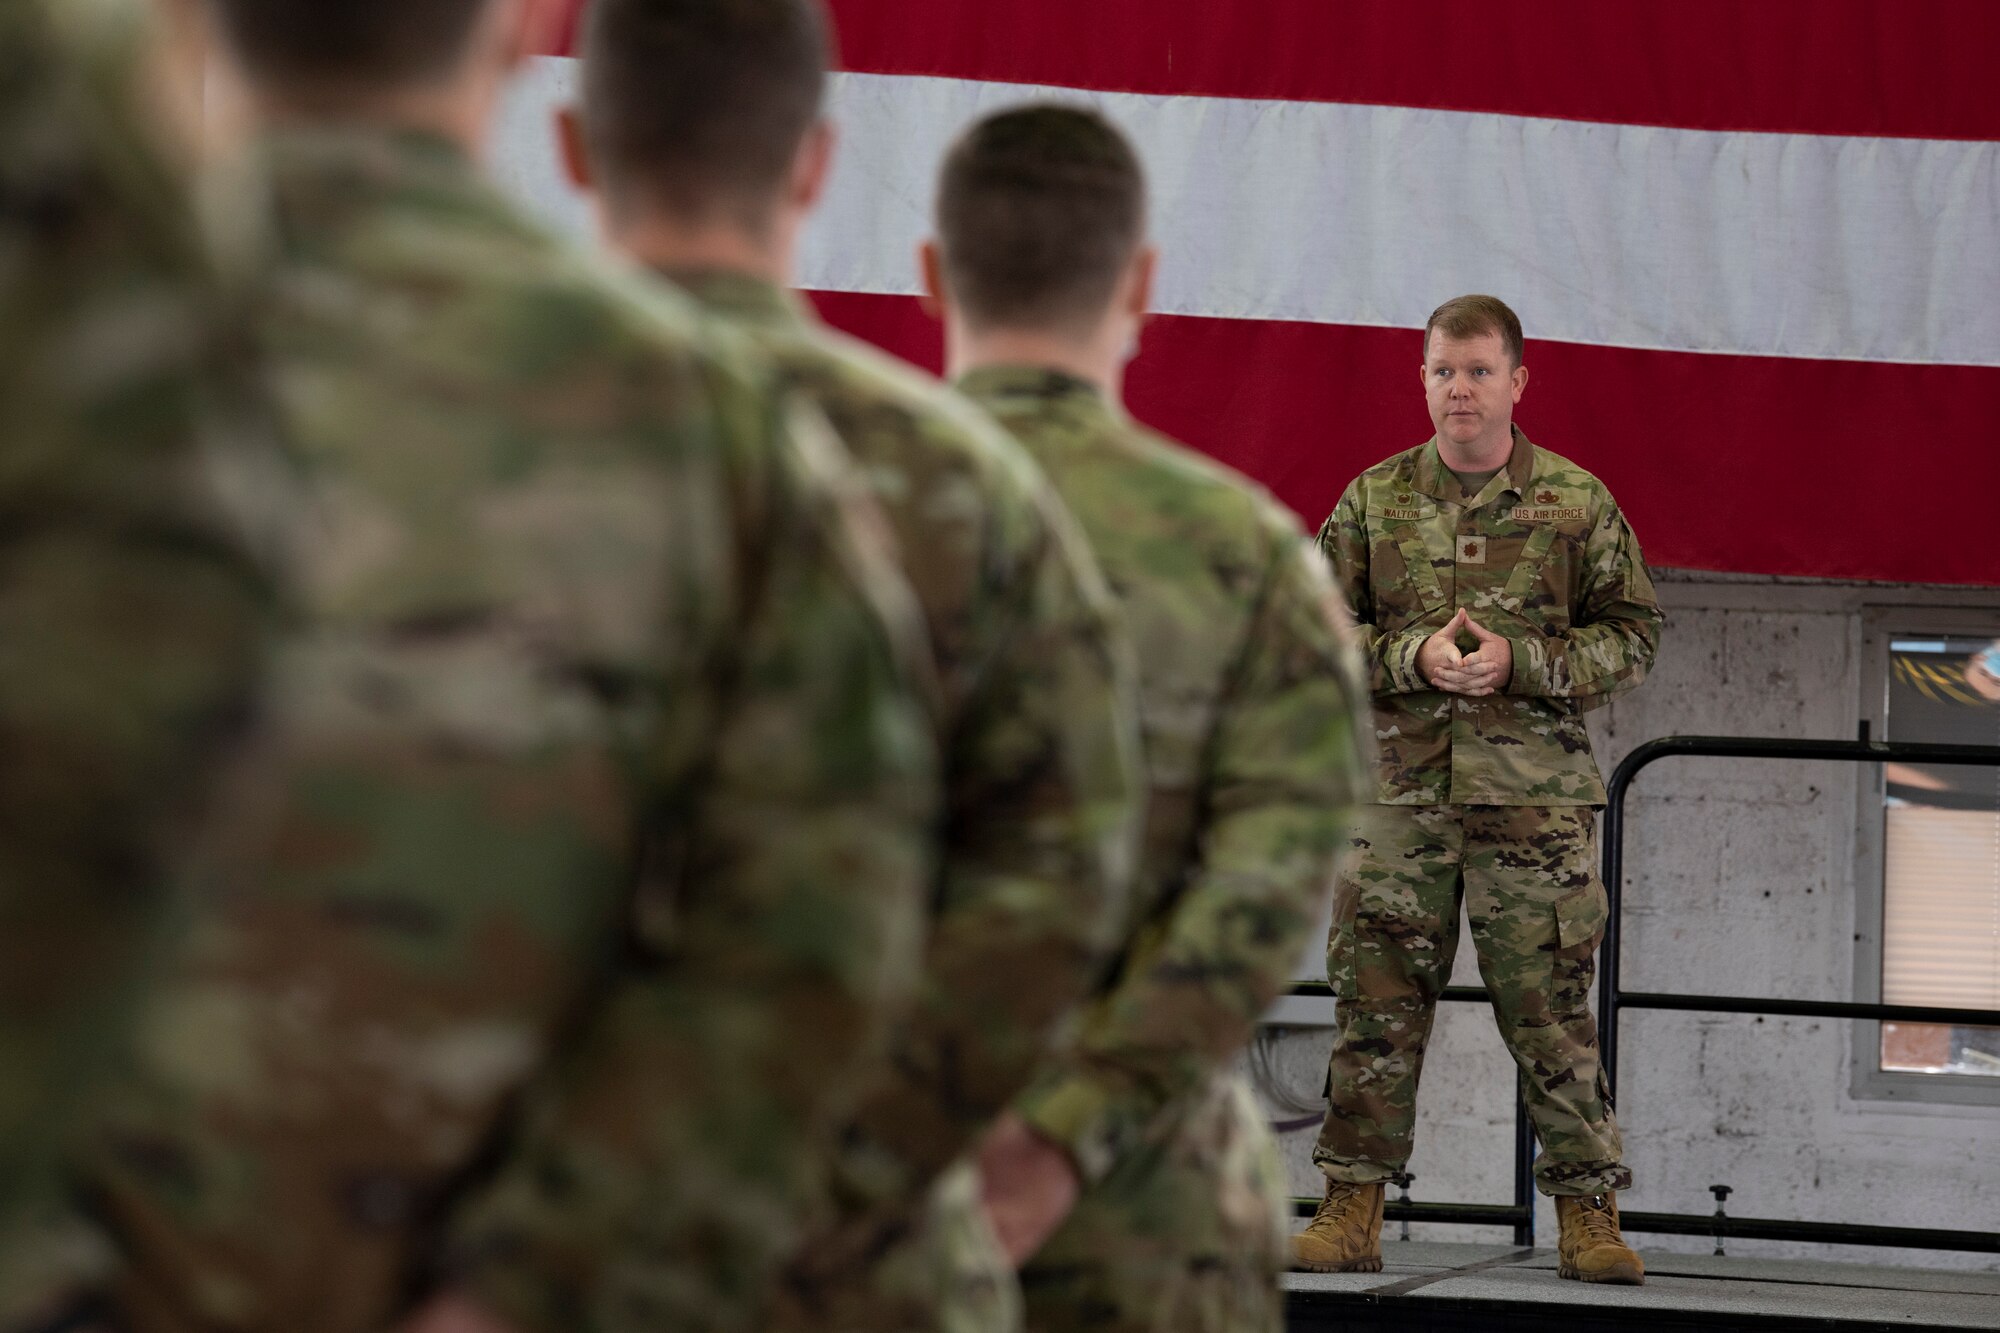 U.S. Air Force Maj. Kevin Walton, 52nd Maintenance Squadron commander, speaks to members of his new squadron after taking command of the squadron during an assumption of command ceremony July 9, 2021, on Spangdahlem Air Base, Germany.